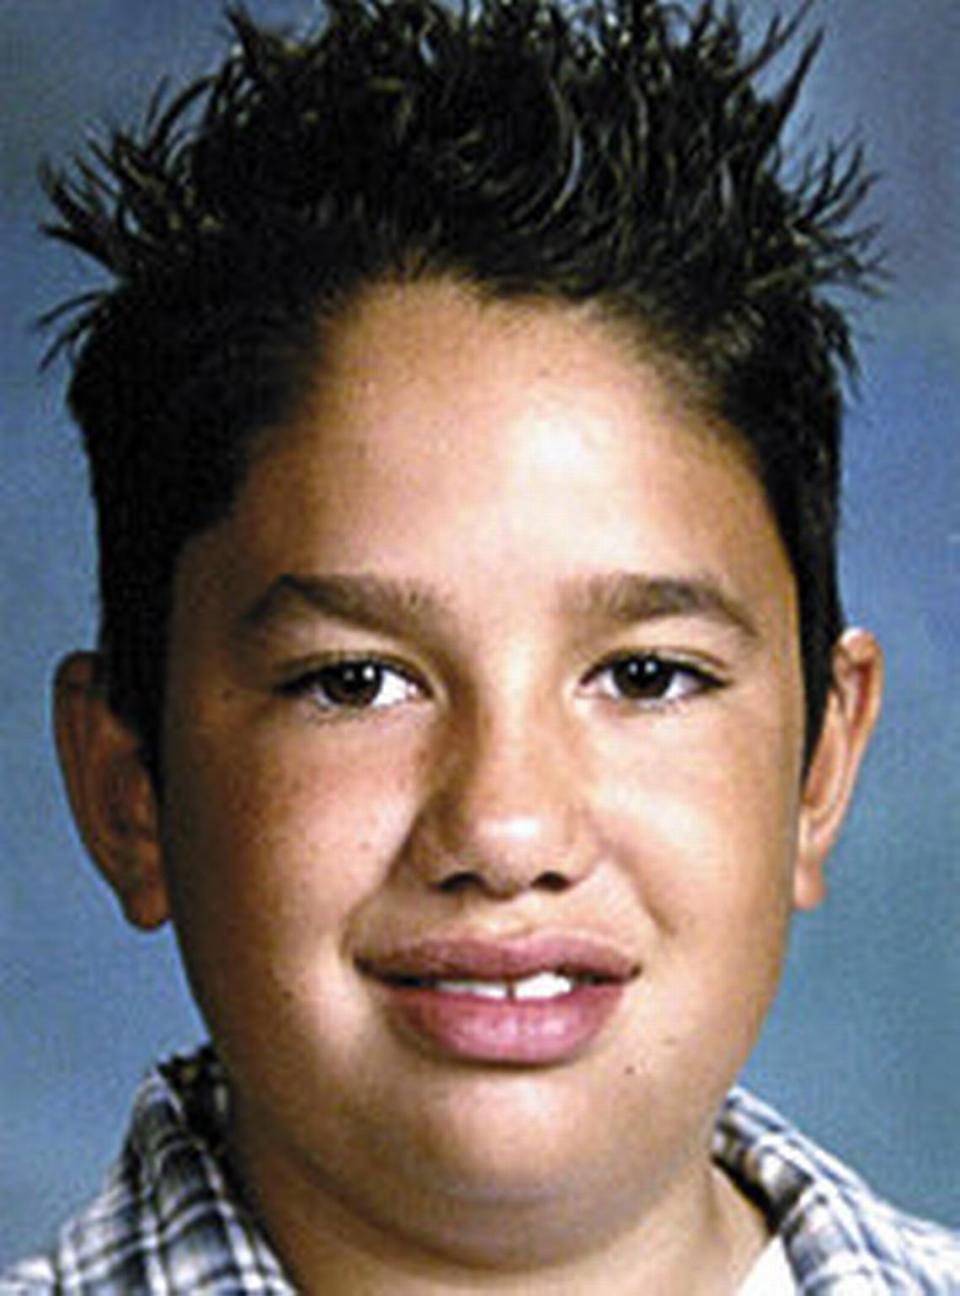 Jerry Rios, 11, of Gardena and his uncle Stephen Wells of San Pedro were was shot to death on camping trip to Morro Bay on July 8, 2001. Stephen Arthur Deflaun has been charged with their murders.